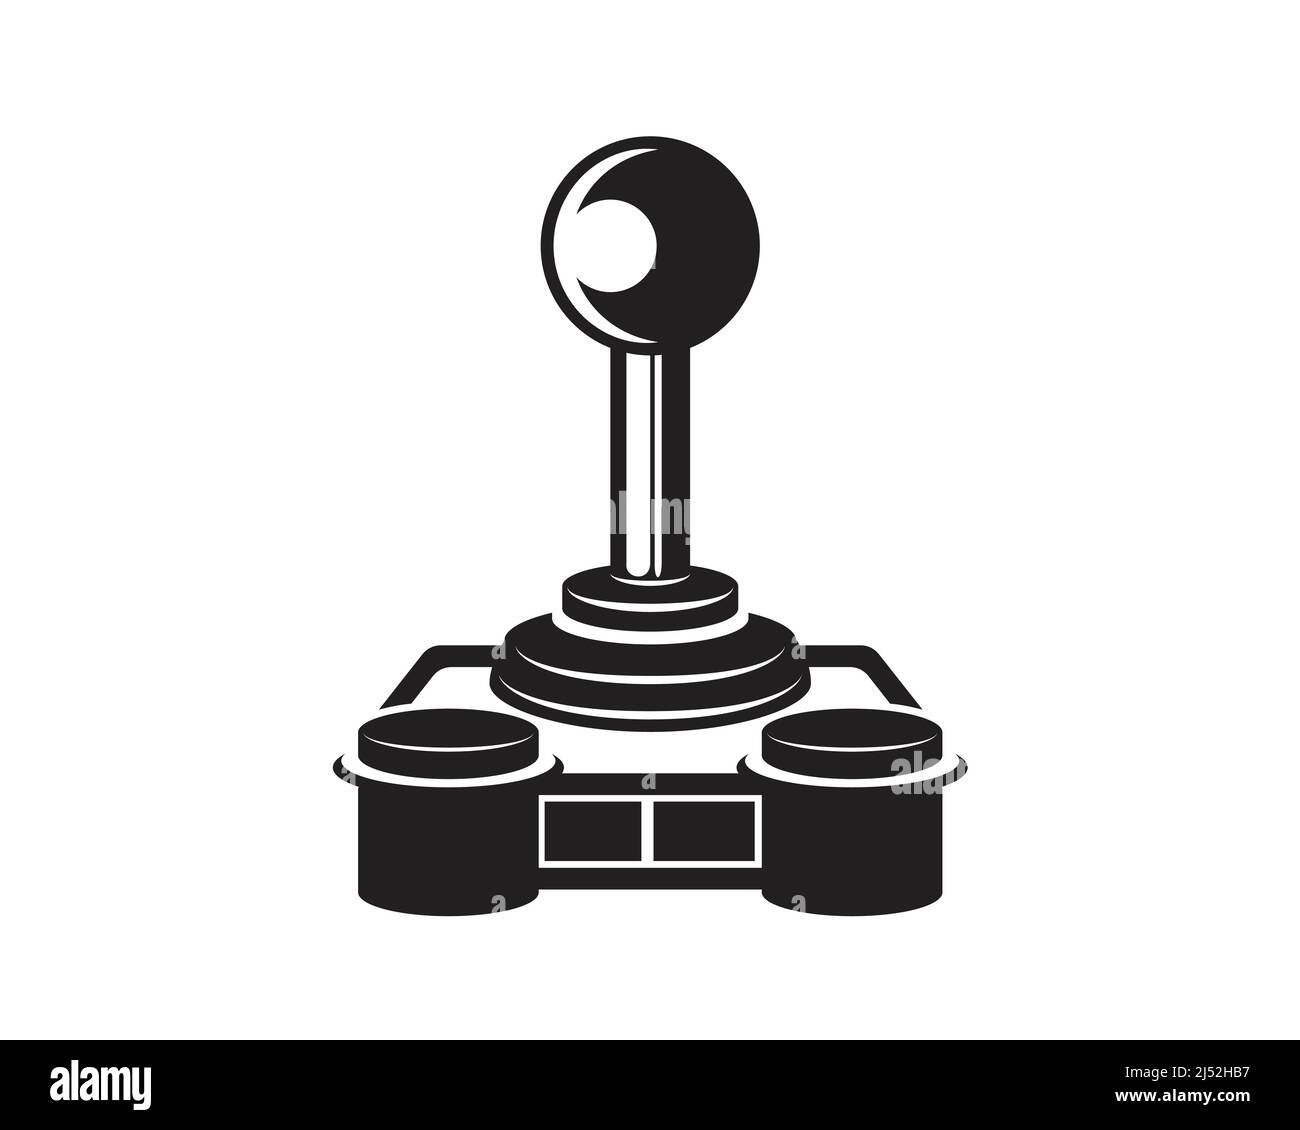 Retro Game Joystick Illustration with Silhouette Style Vector Stock Vector